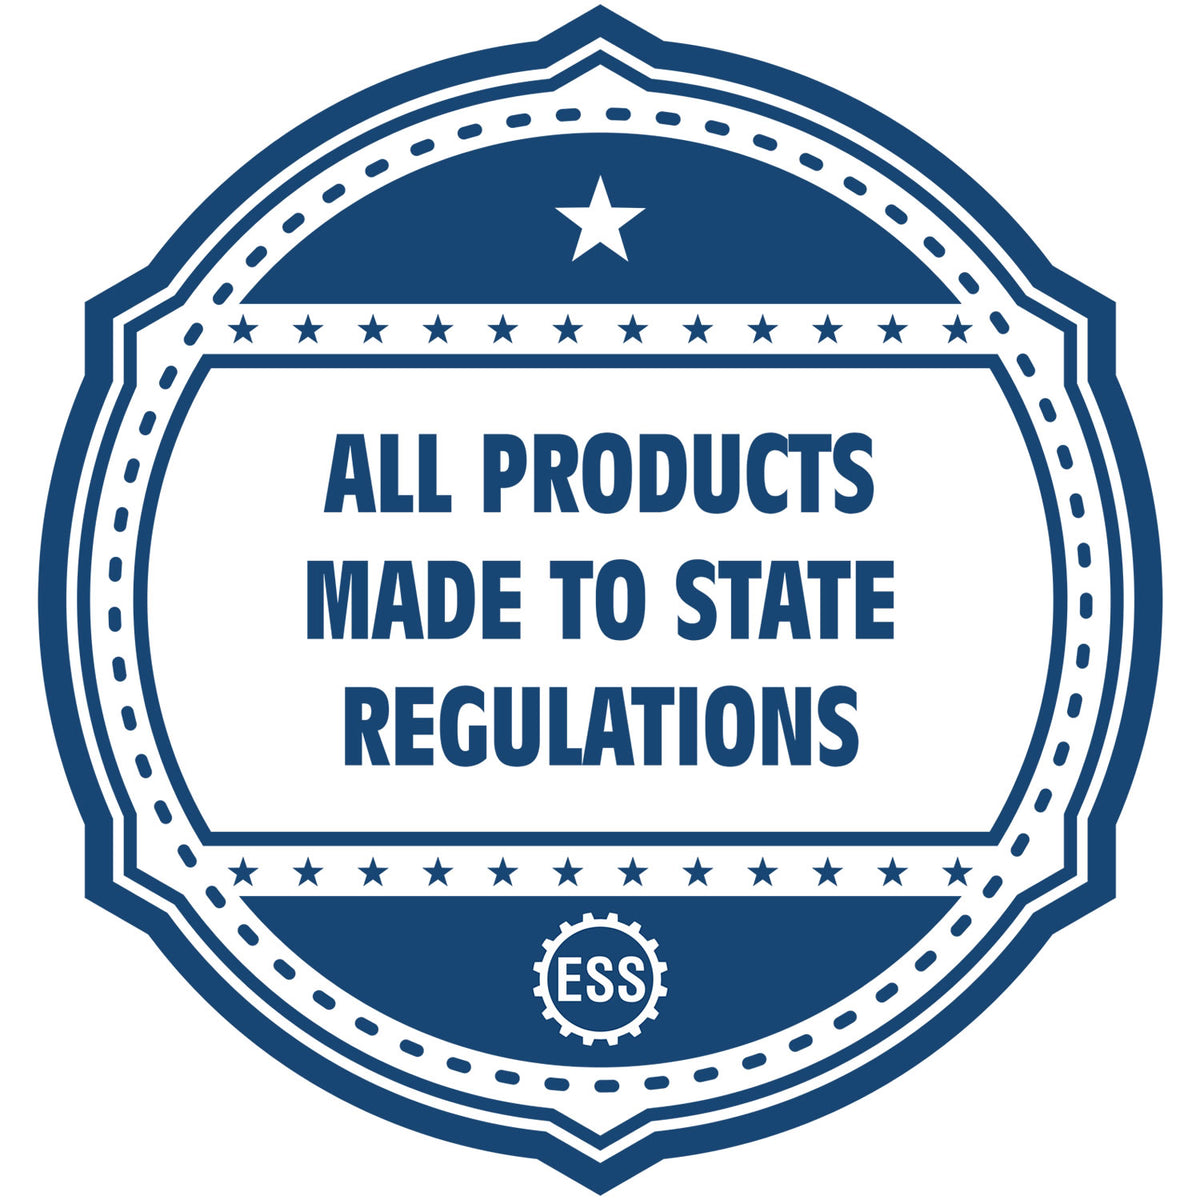 An icon or badge element for the MaxLight Premium Pre-Inked New Mexico State Seal Notarial Stamp showing that this product is made in compliance with state regulations.